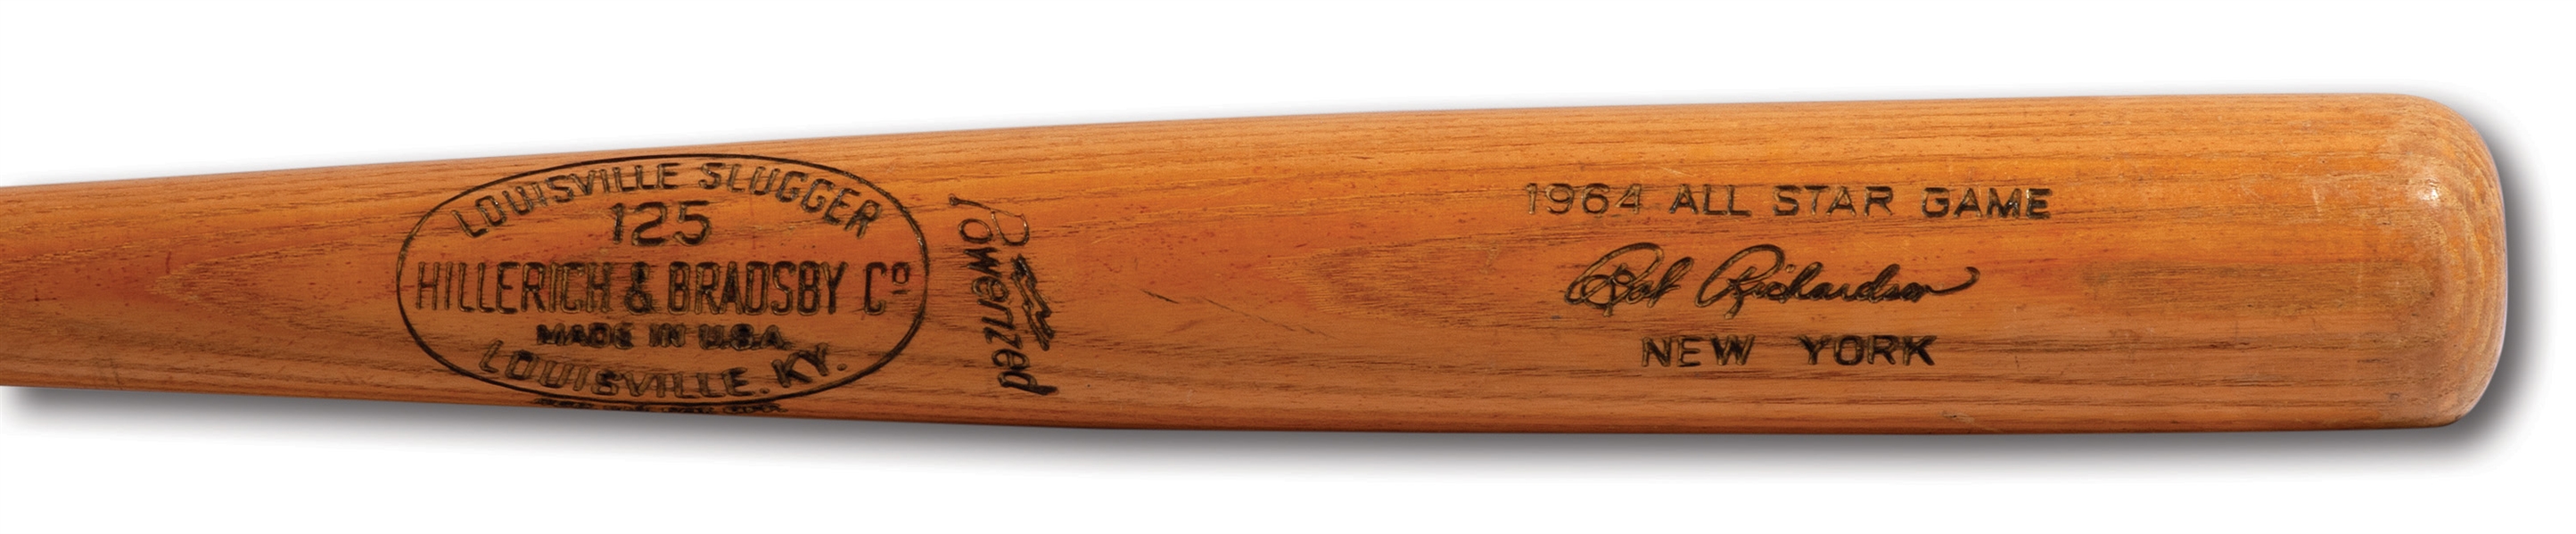 BOBBY RICHARDSON 1964 ALL-STAR GAME HILLERICH & BRADSBY PROFESSIONAL MODEL GAME ISSUED BAT (PINSTRIPE DYNASTY COLLECTION)